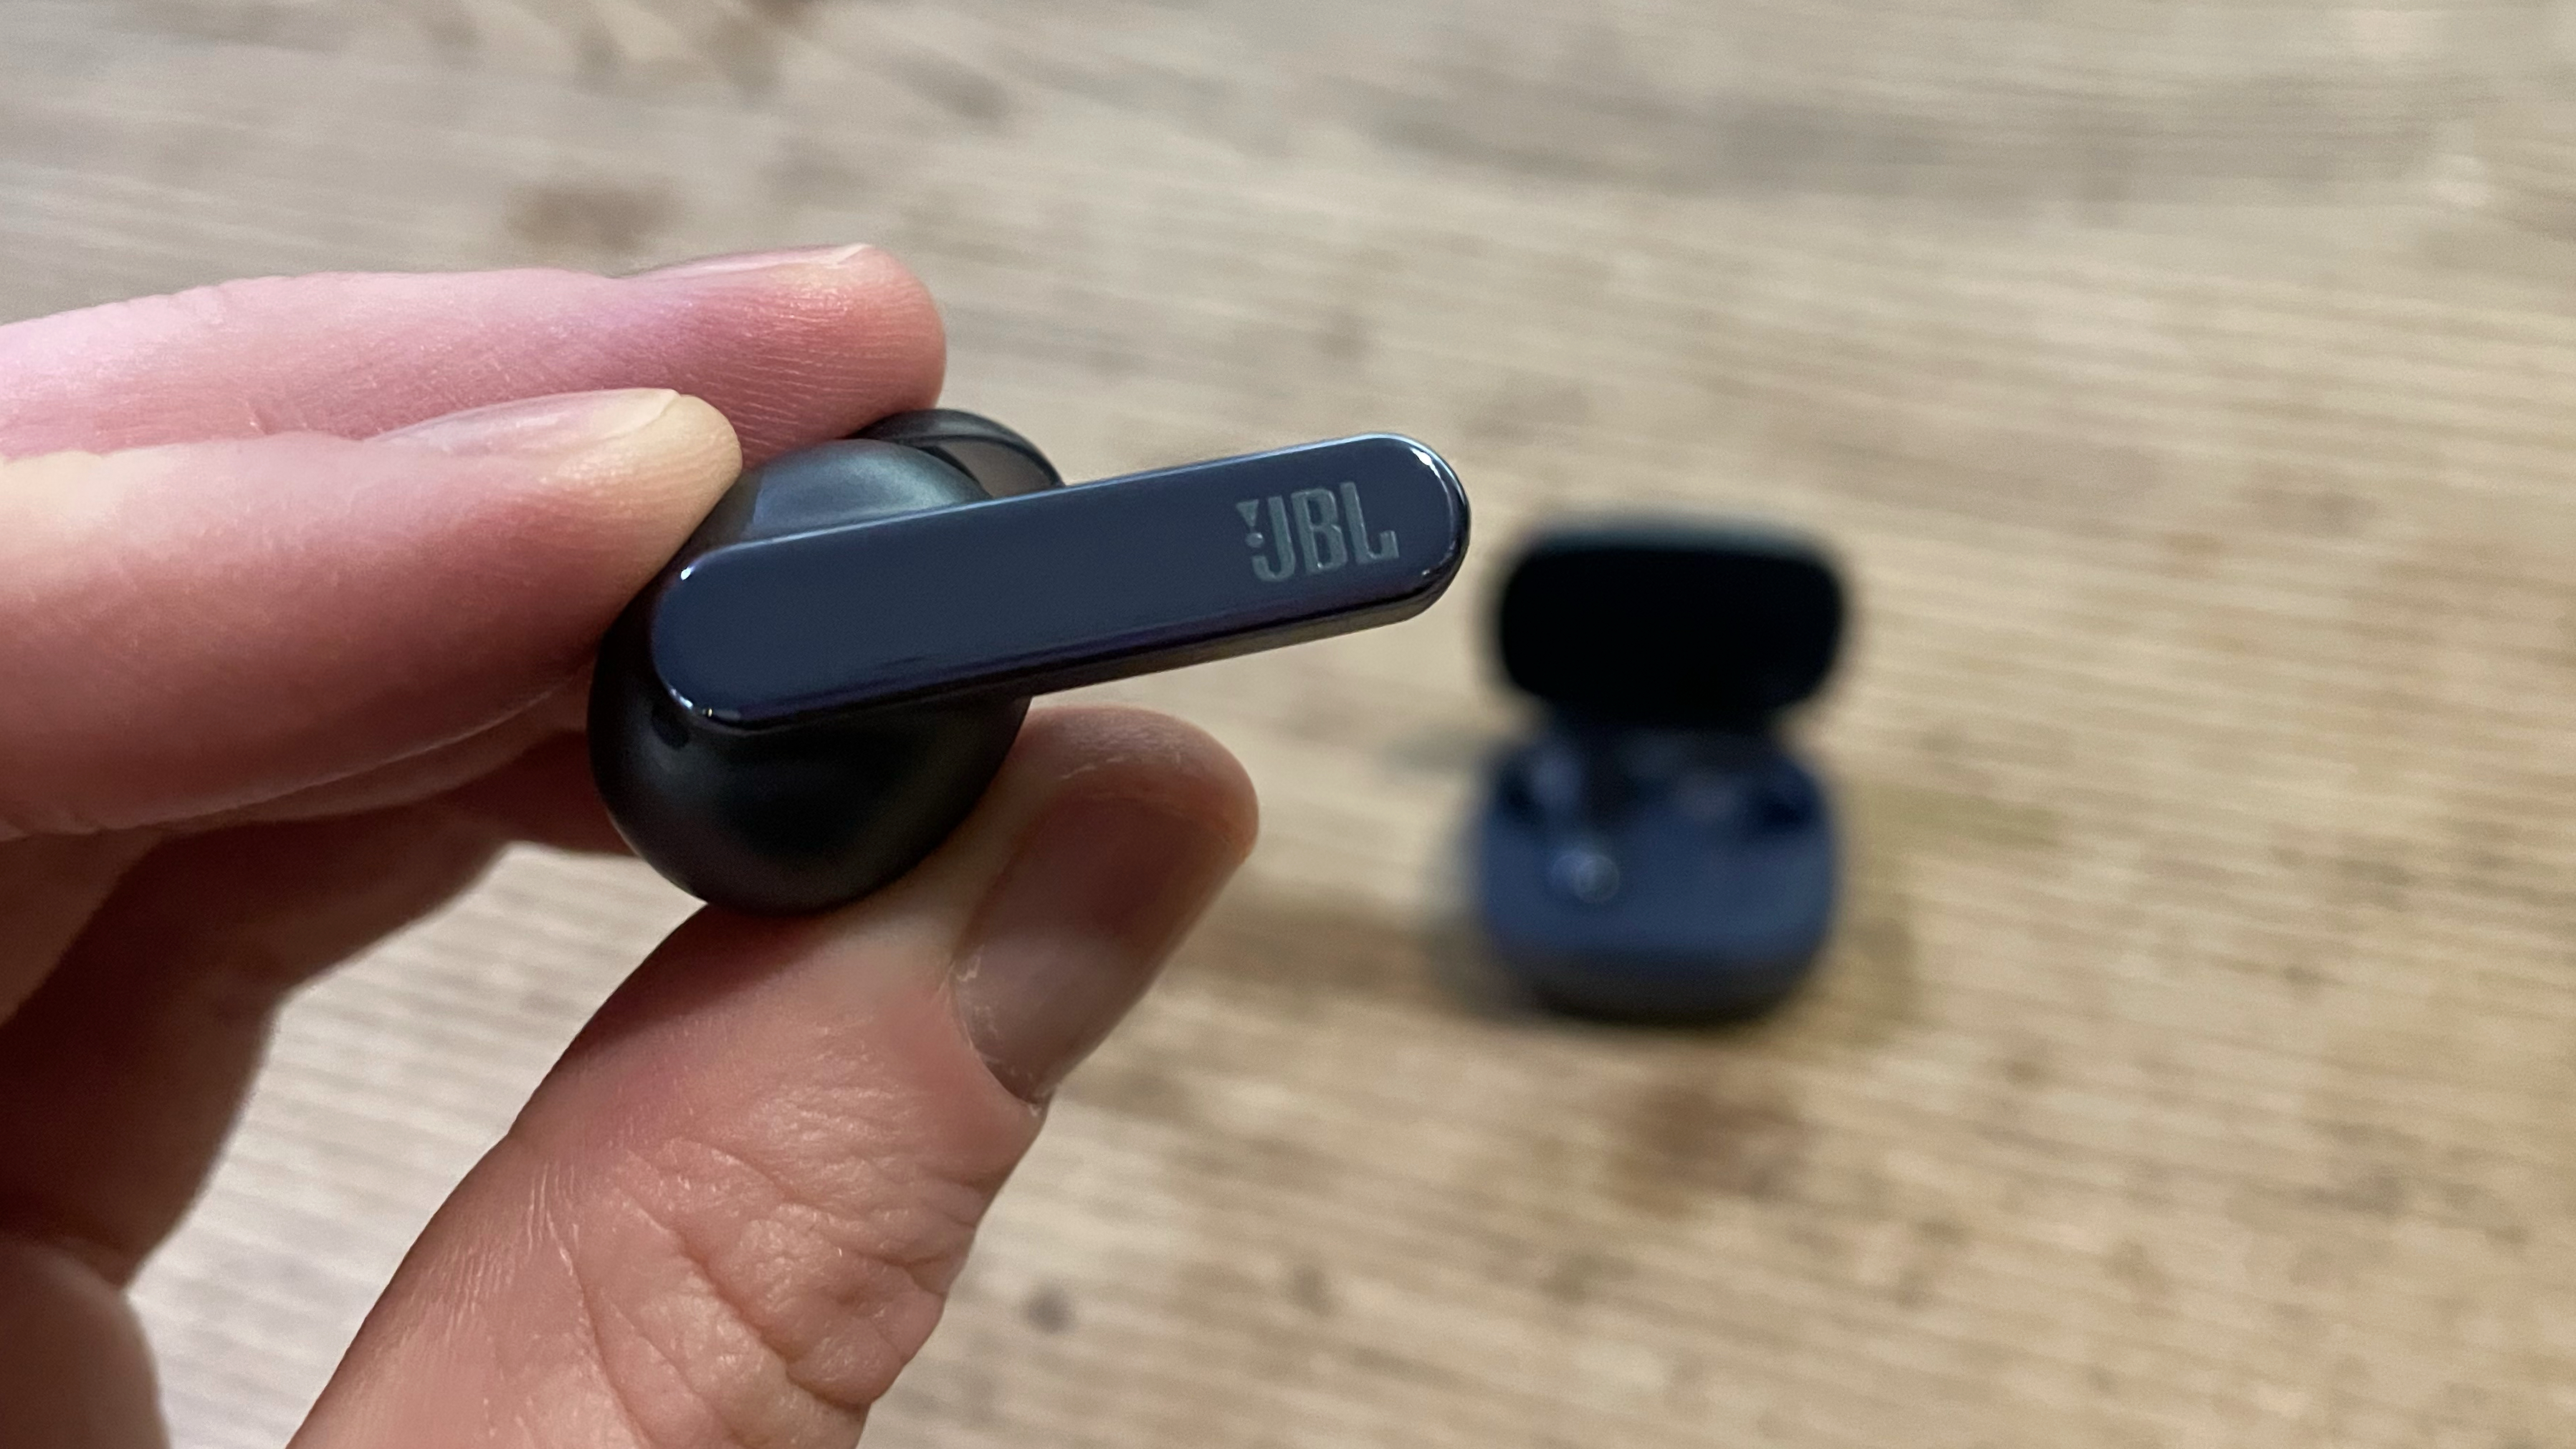 JBL Live Pro 2 earbuds held up to the camera